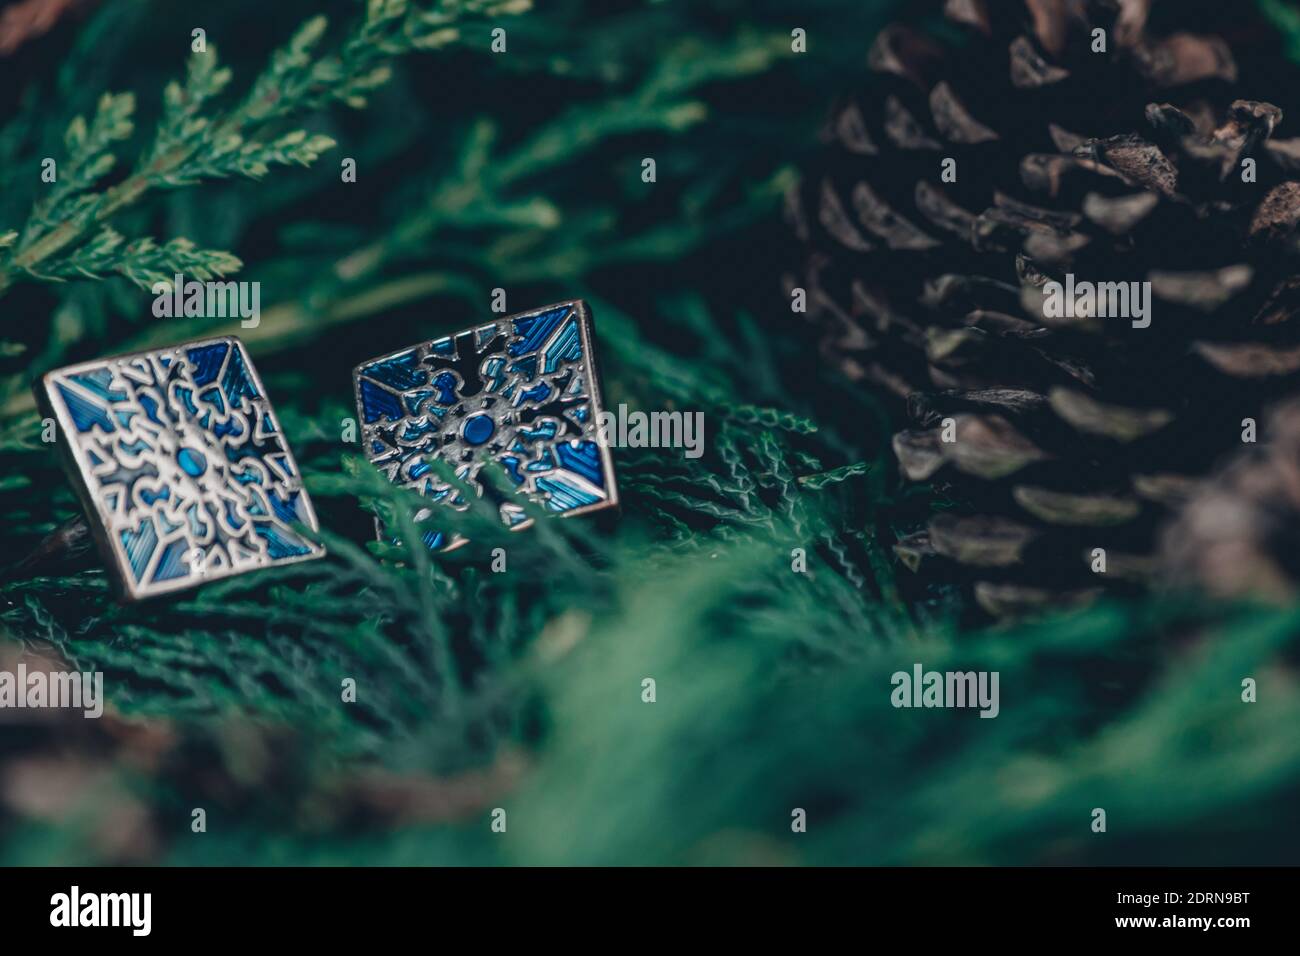 Thame,UK - 25 Nov 2020: Blue cufflinks in silver on evergreen and pinecones background, snowflake pattern on each cufflink, christmas mens jewellery Stock Photo